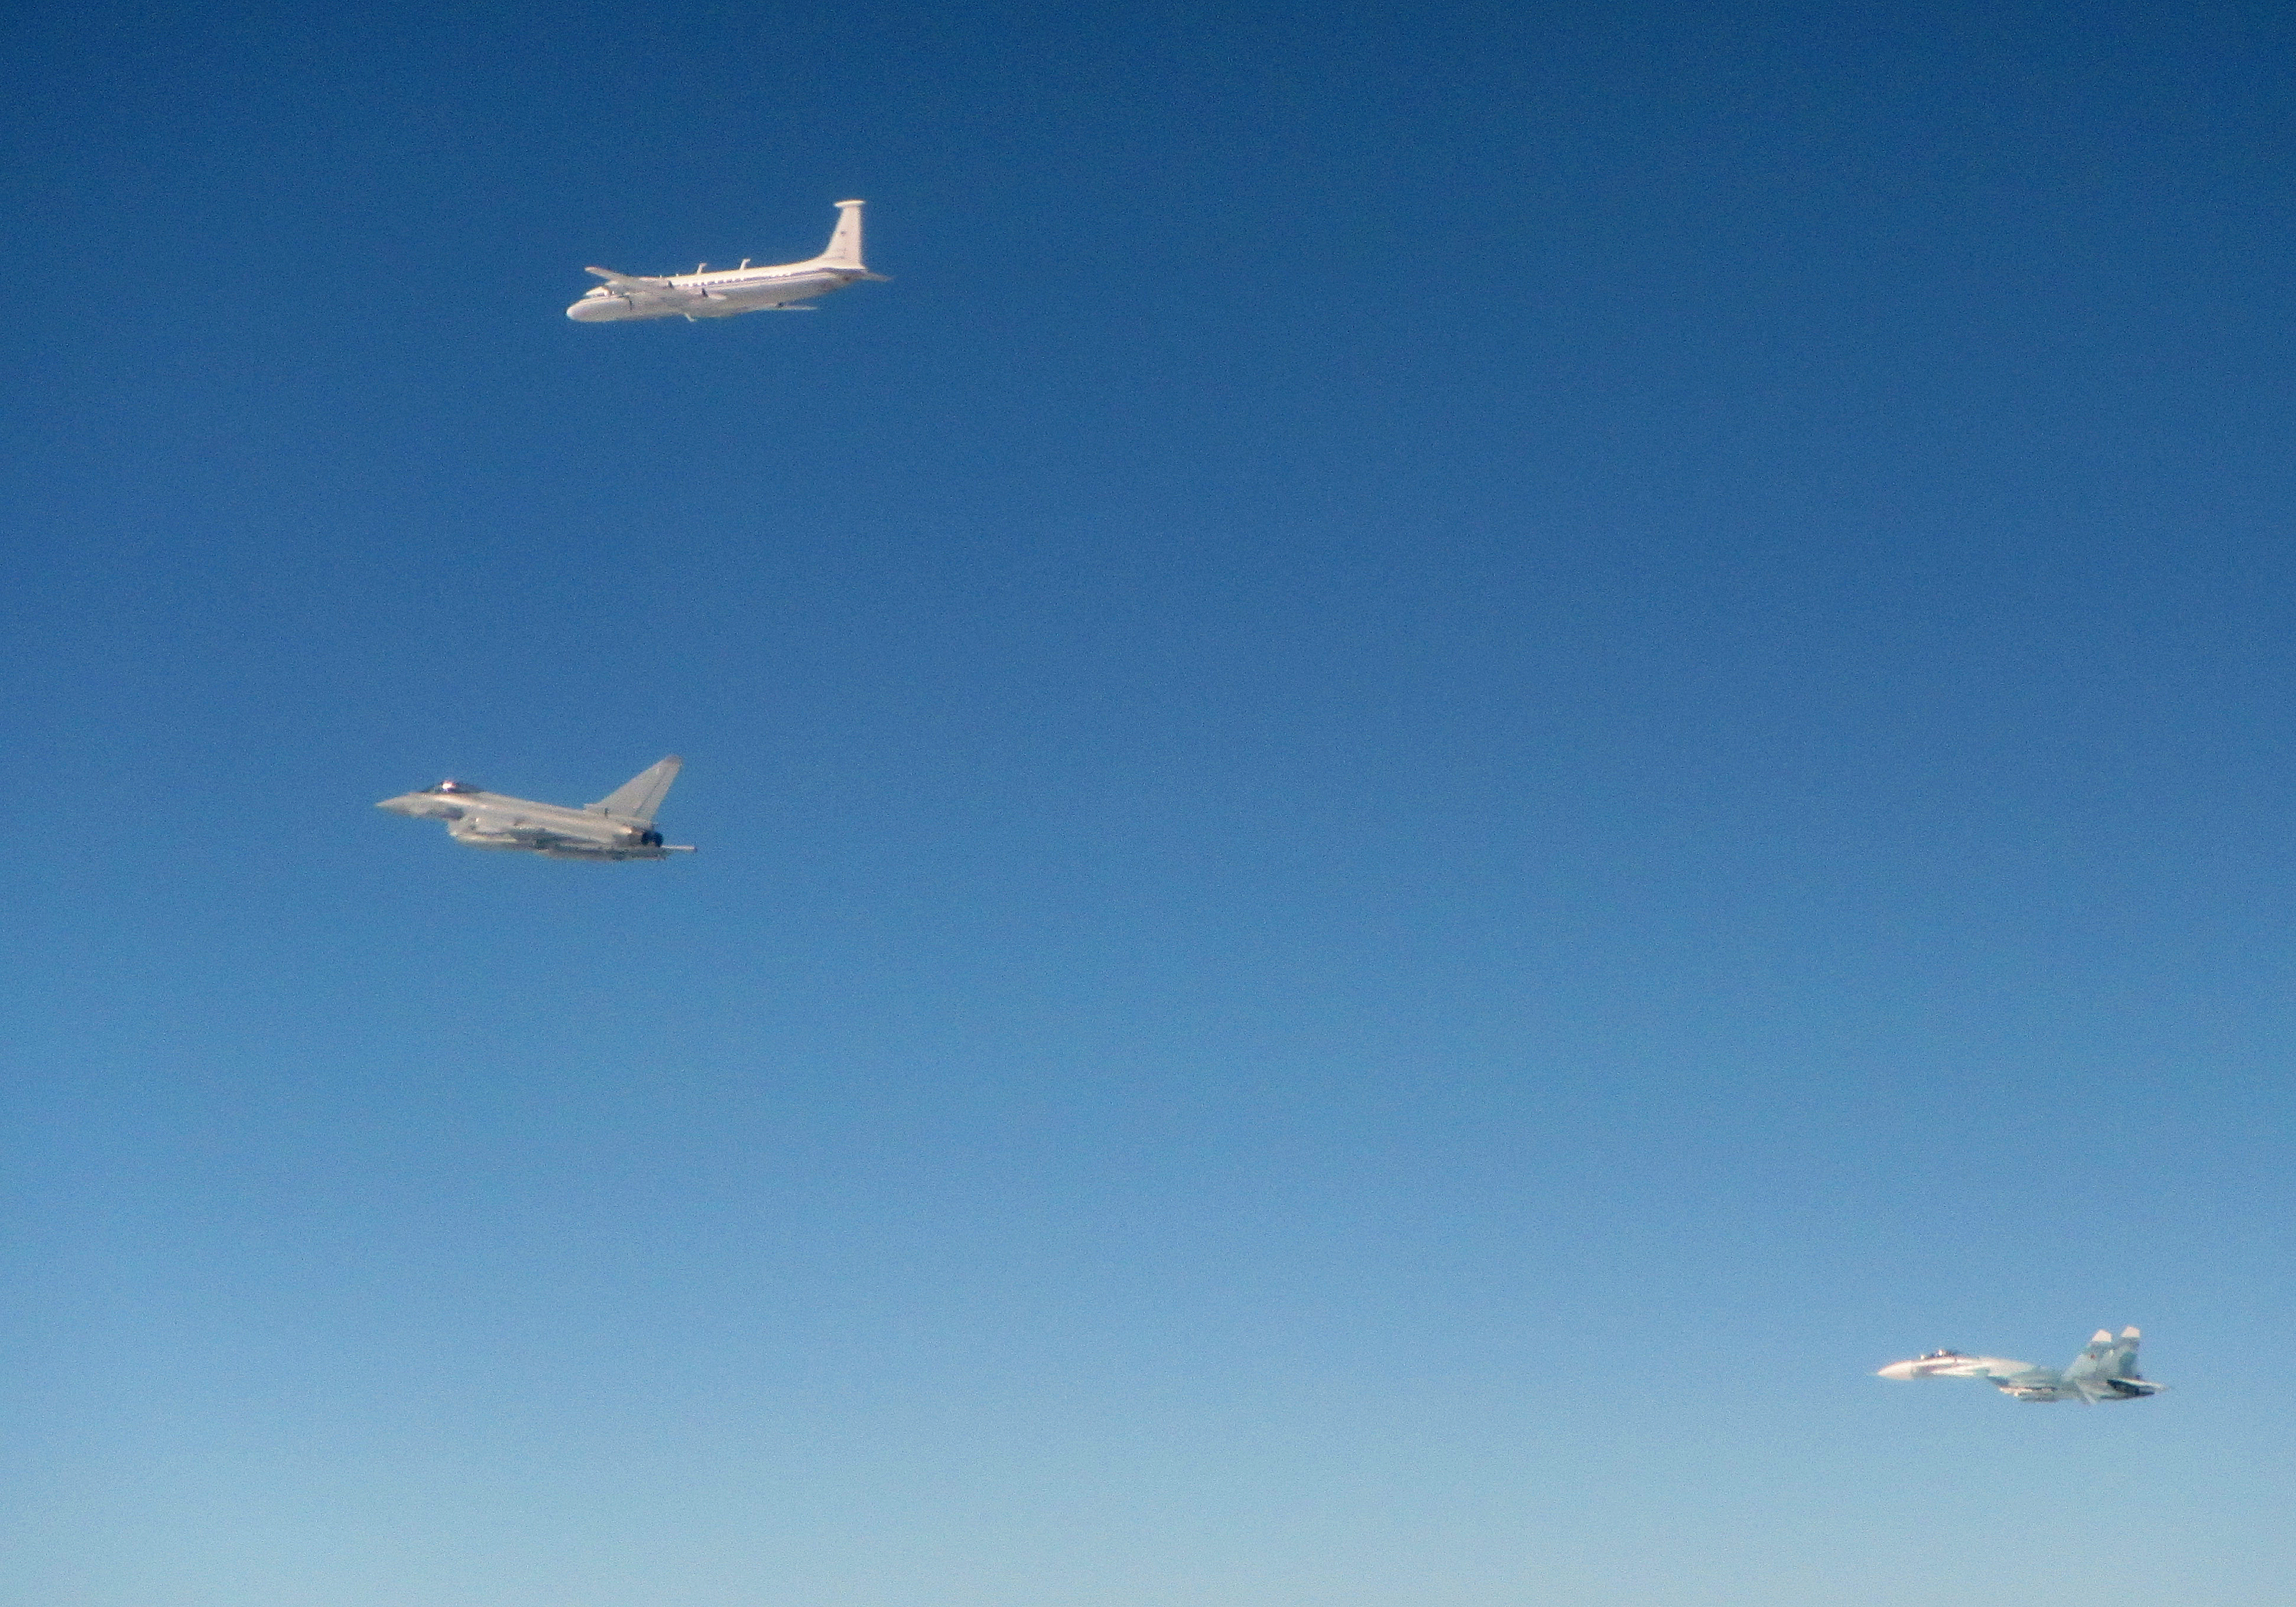 Russian Coot-A communications aircraft (top) and Su-27 Flanker fighter (lower right) intercepted by Royal Air Force Typhoons (centre) within NATO's area of interest near Estonia on 17 May 16. Royal Air Force Typhoons stationed in Estonia as part of the NATO Baltic Air Policing mission have scrambled for the second time during their current deployment to intercept Russian aircraft in NATO's area of interest. The Typhoons scrambled on 17 May to investigate five unresponsive Russian aircraft over international waters. The Russian aircraft - identified as four Su-27 Flanker fighters and one Coot-A communications aircraft - were not communicating with air traffic control, and did not transmit a recognised identification code.